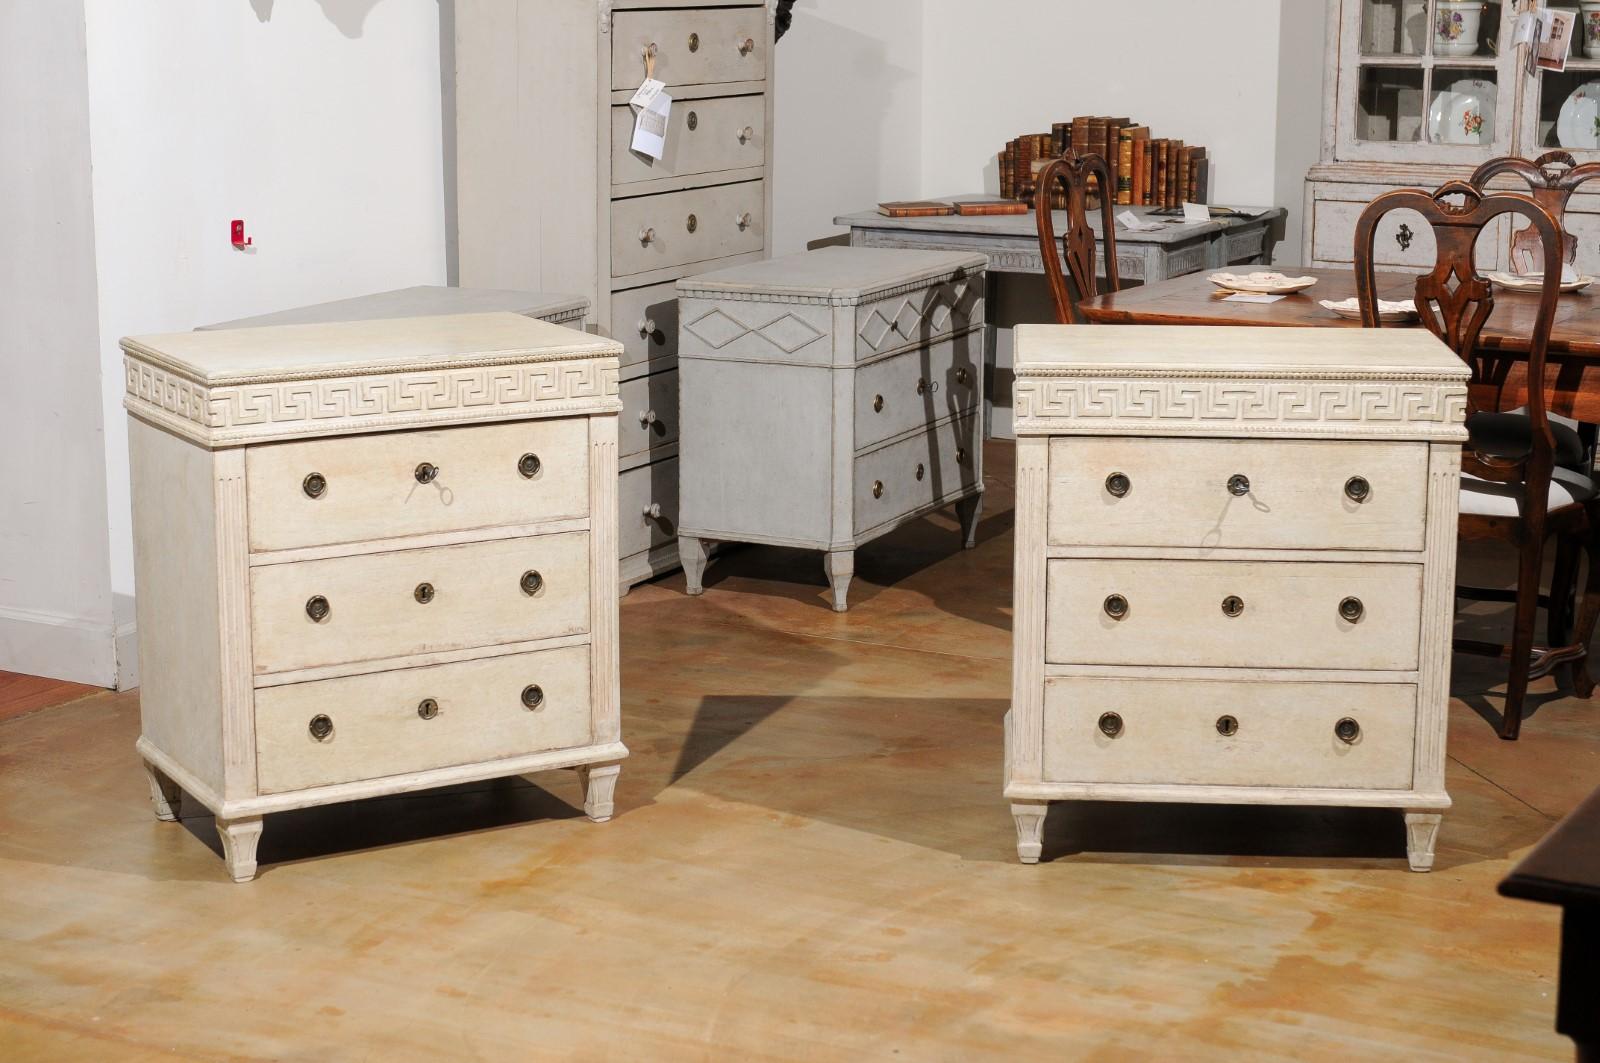 A pair of Swedish neoclassical style painted chests from the 19th century, with Greek Key friezes and fluted side posts. Created in Sweden during the 19th century, each of this pair of neoclassical style chests features a rectangular top sitting